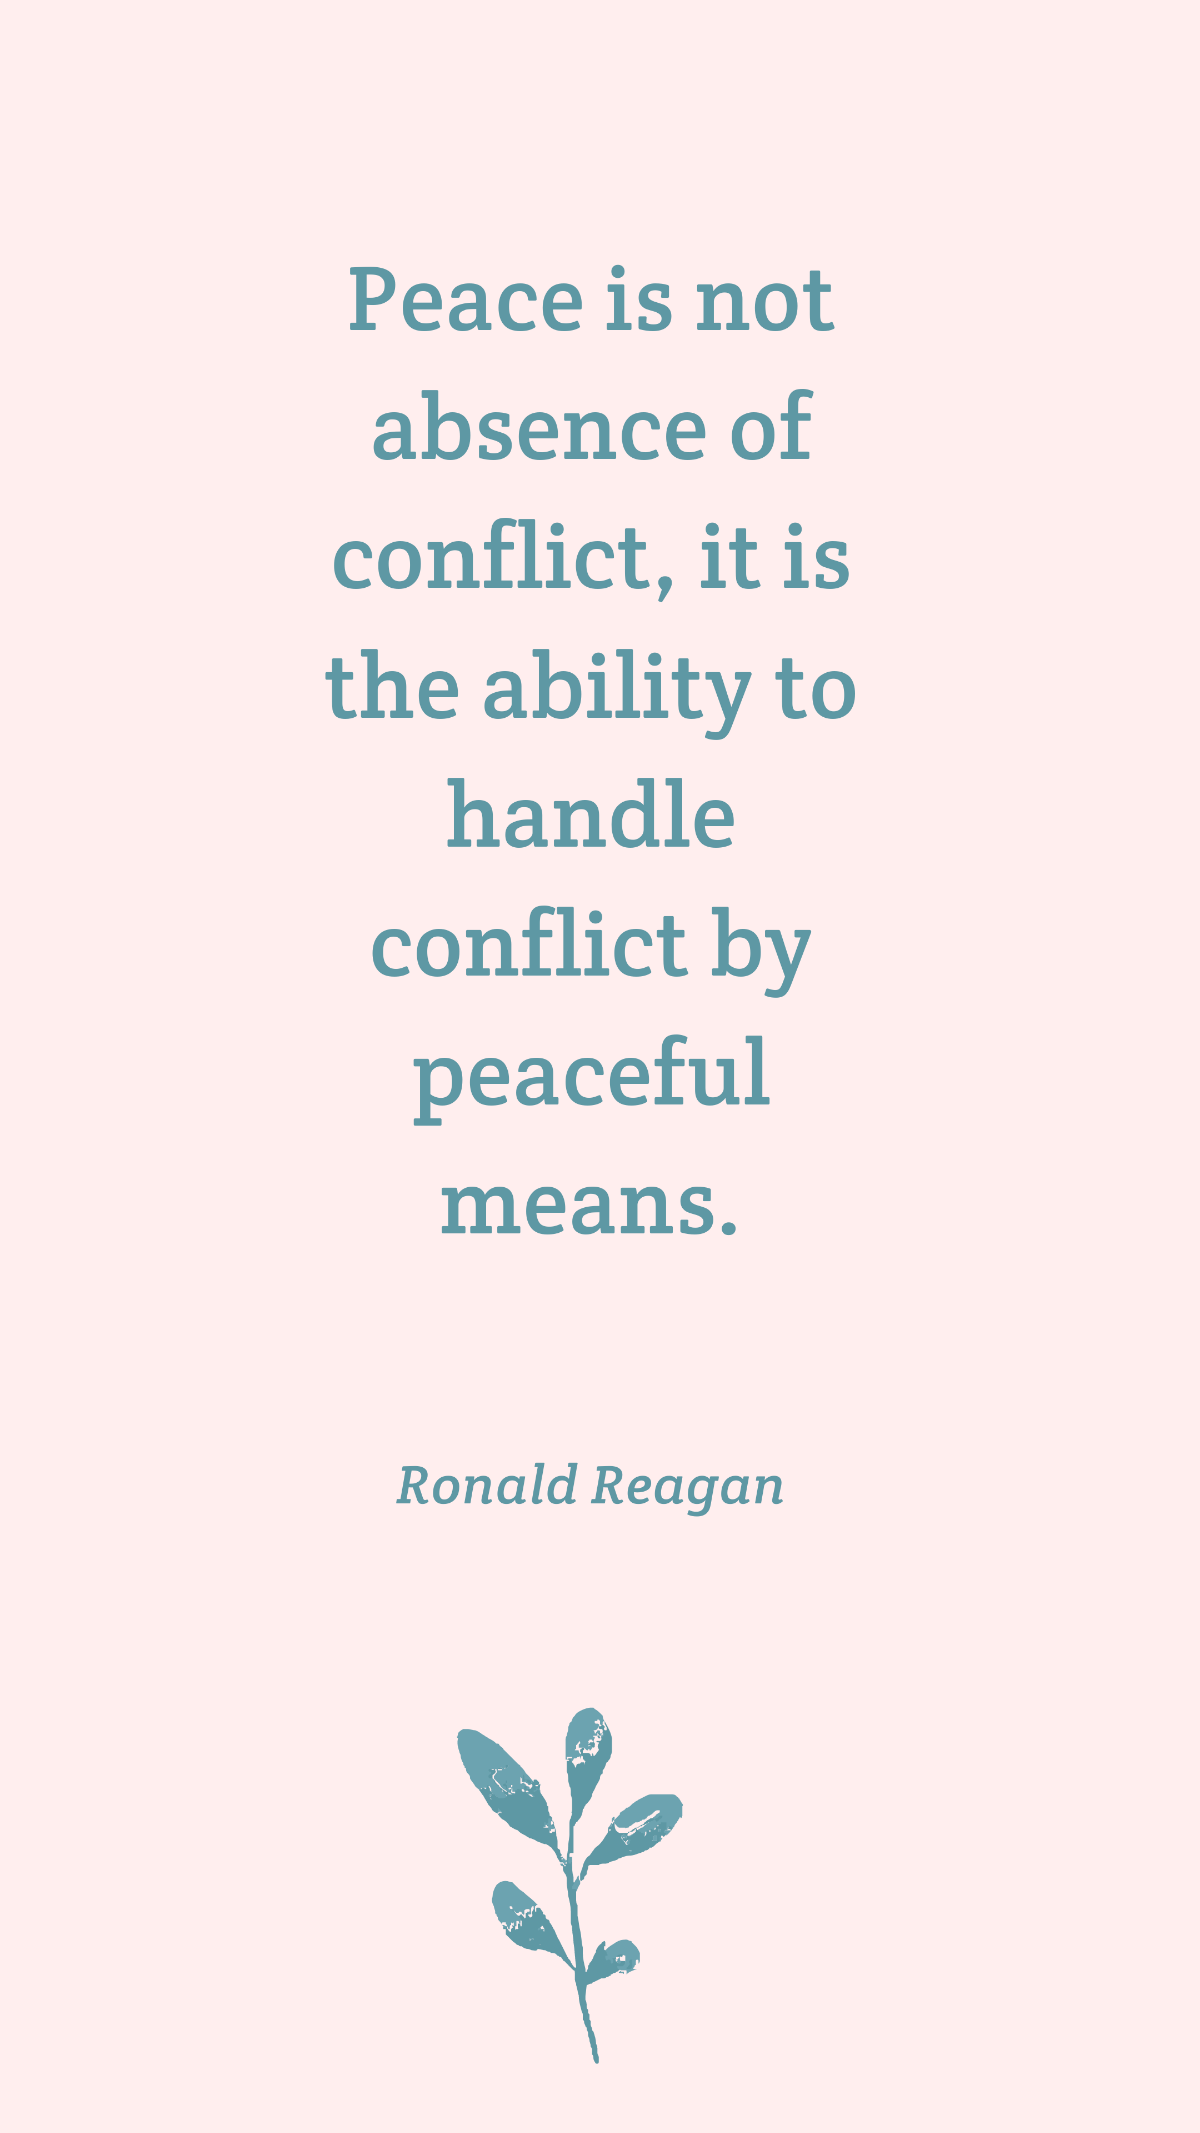 Ronald Reagan - Peace is not absence of conflict, it is the ability to handle conflict by peaceful means.  Template